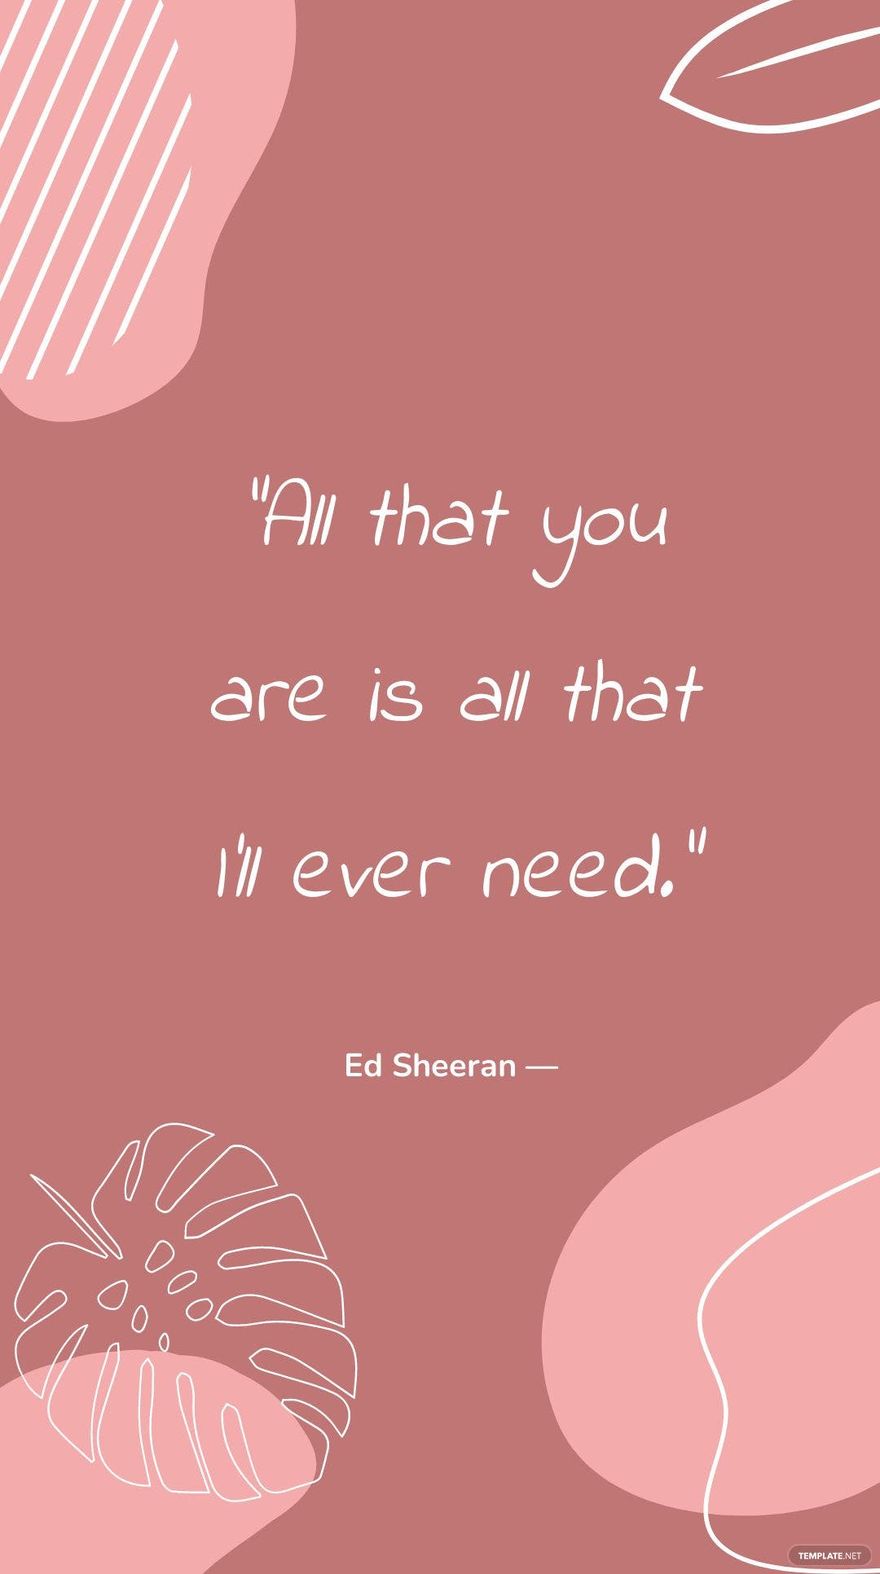 Ed Sheeran — ”All that you are is all that I’ll ever need.”